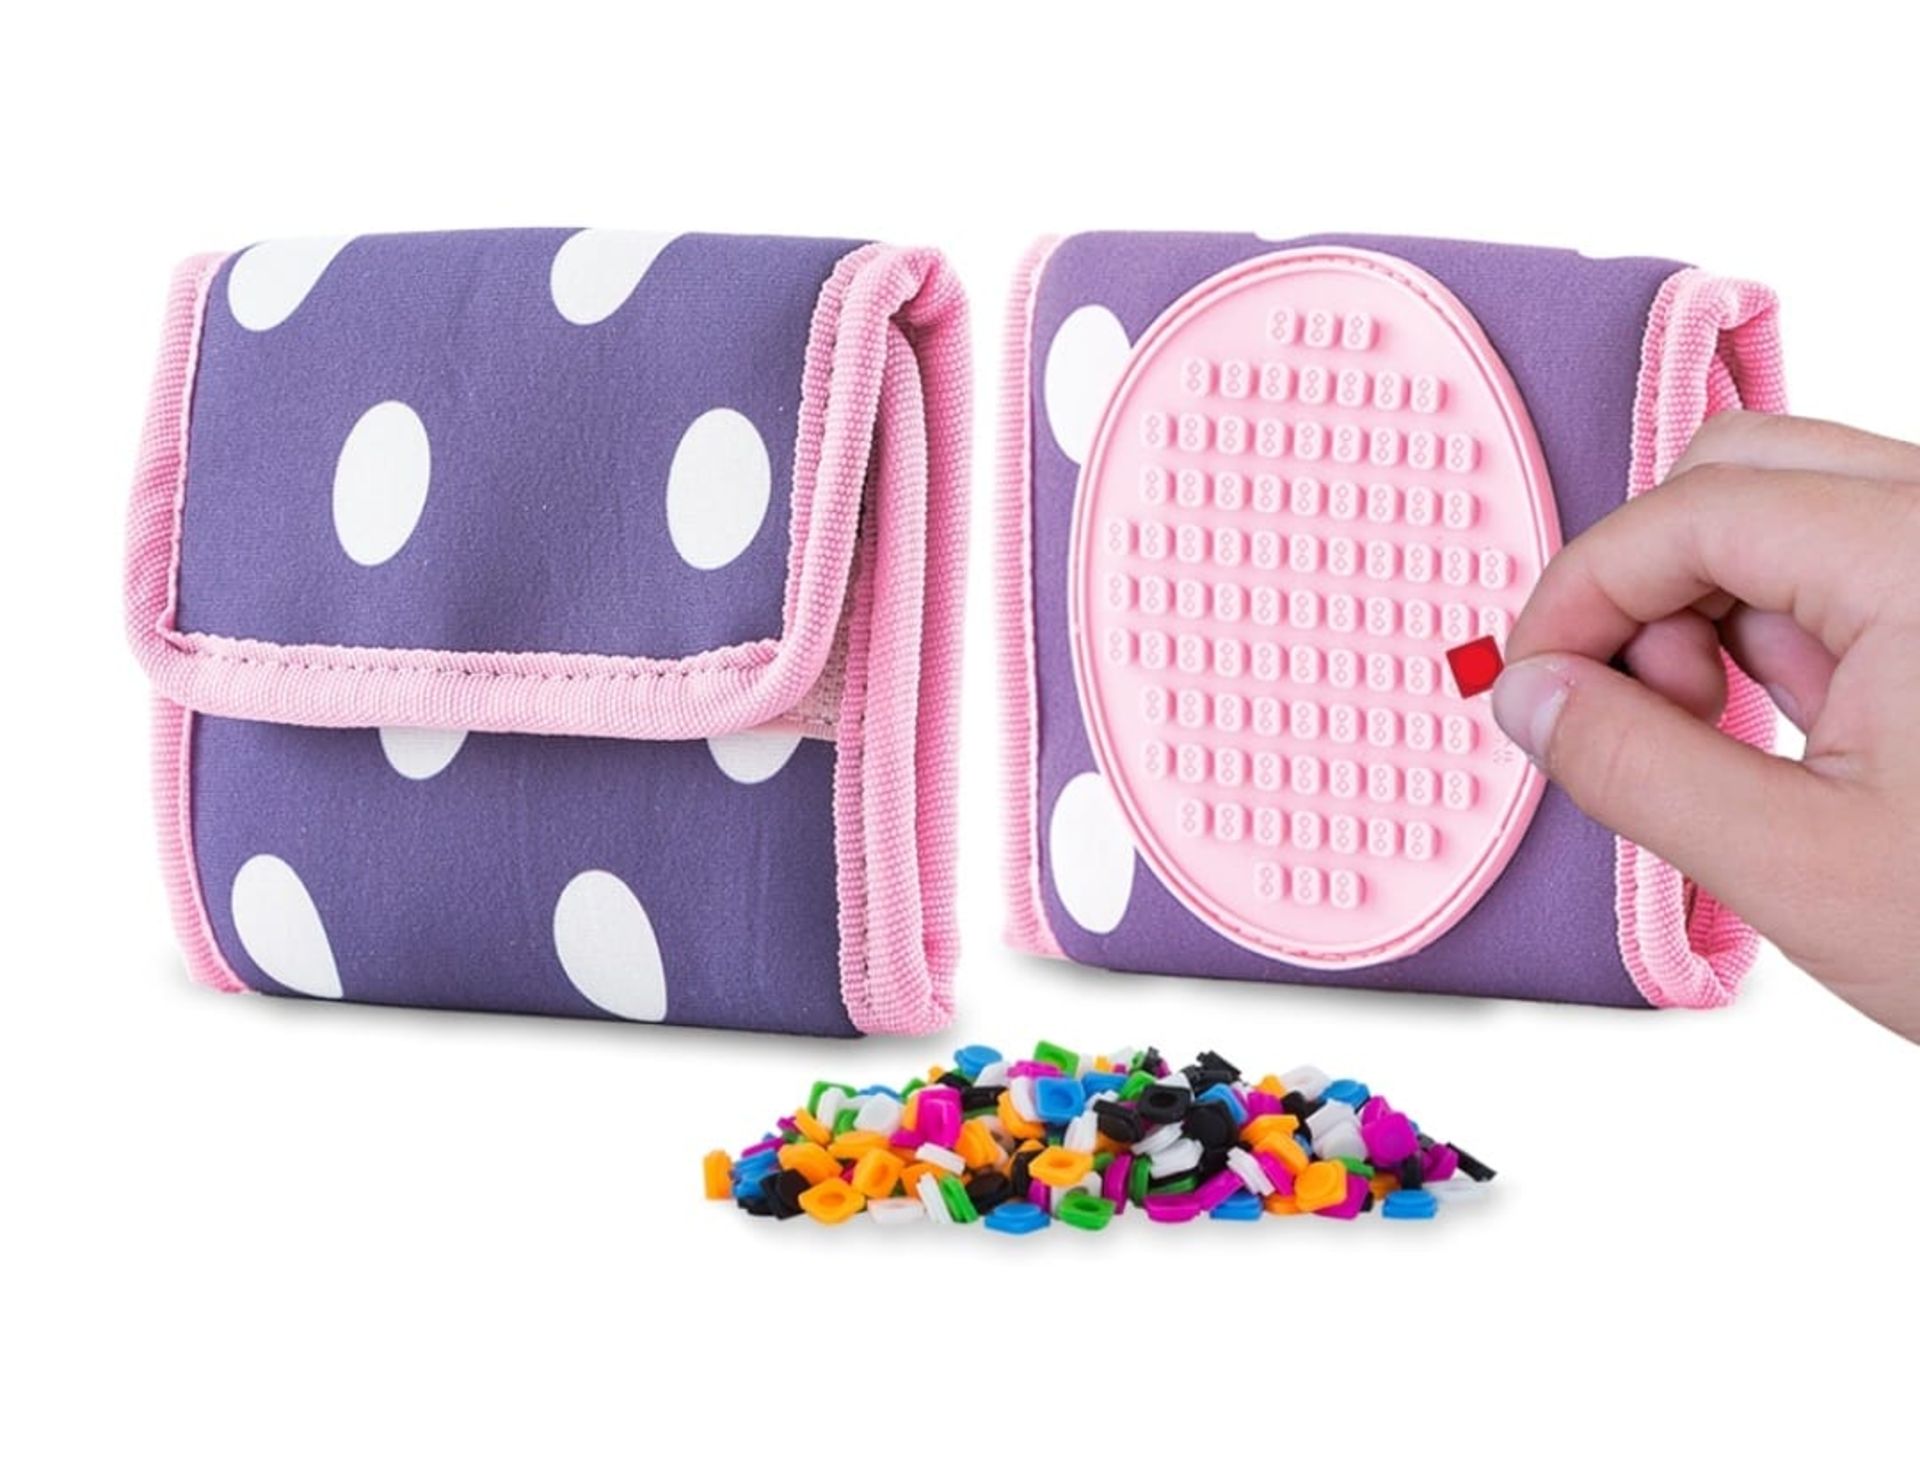 X 6 PIXIE CREW CREATIVE PIXIEL WALLETS BLUE & WHITE DOTS WITH PINK POLKA - TOTAL RRP £73.20 - NEW-